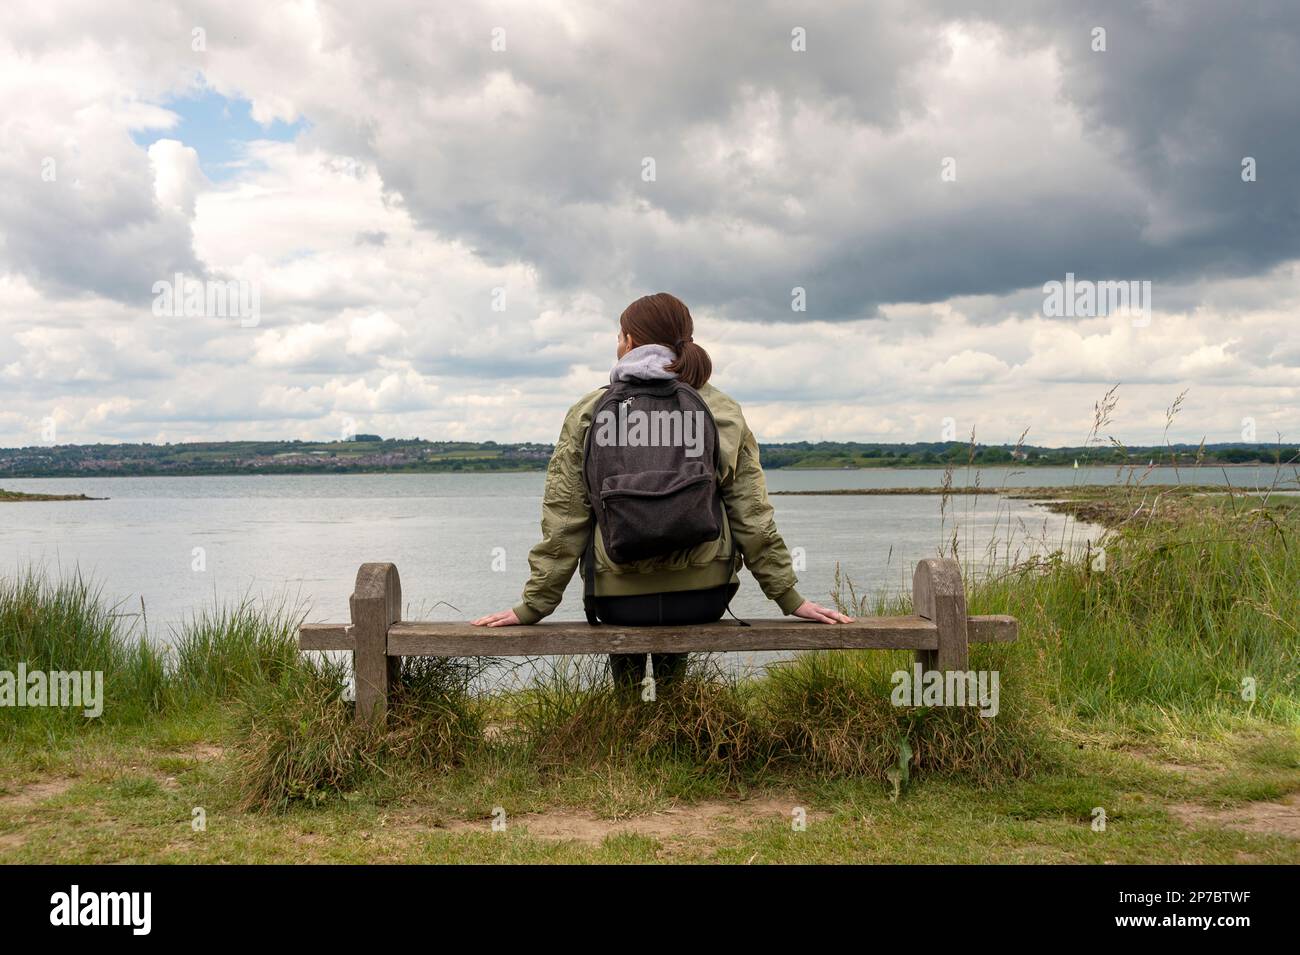 Woman sitting on a bench resting and enjoying the view across water. Thinking spot. Stock Photo